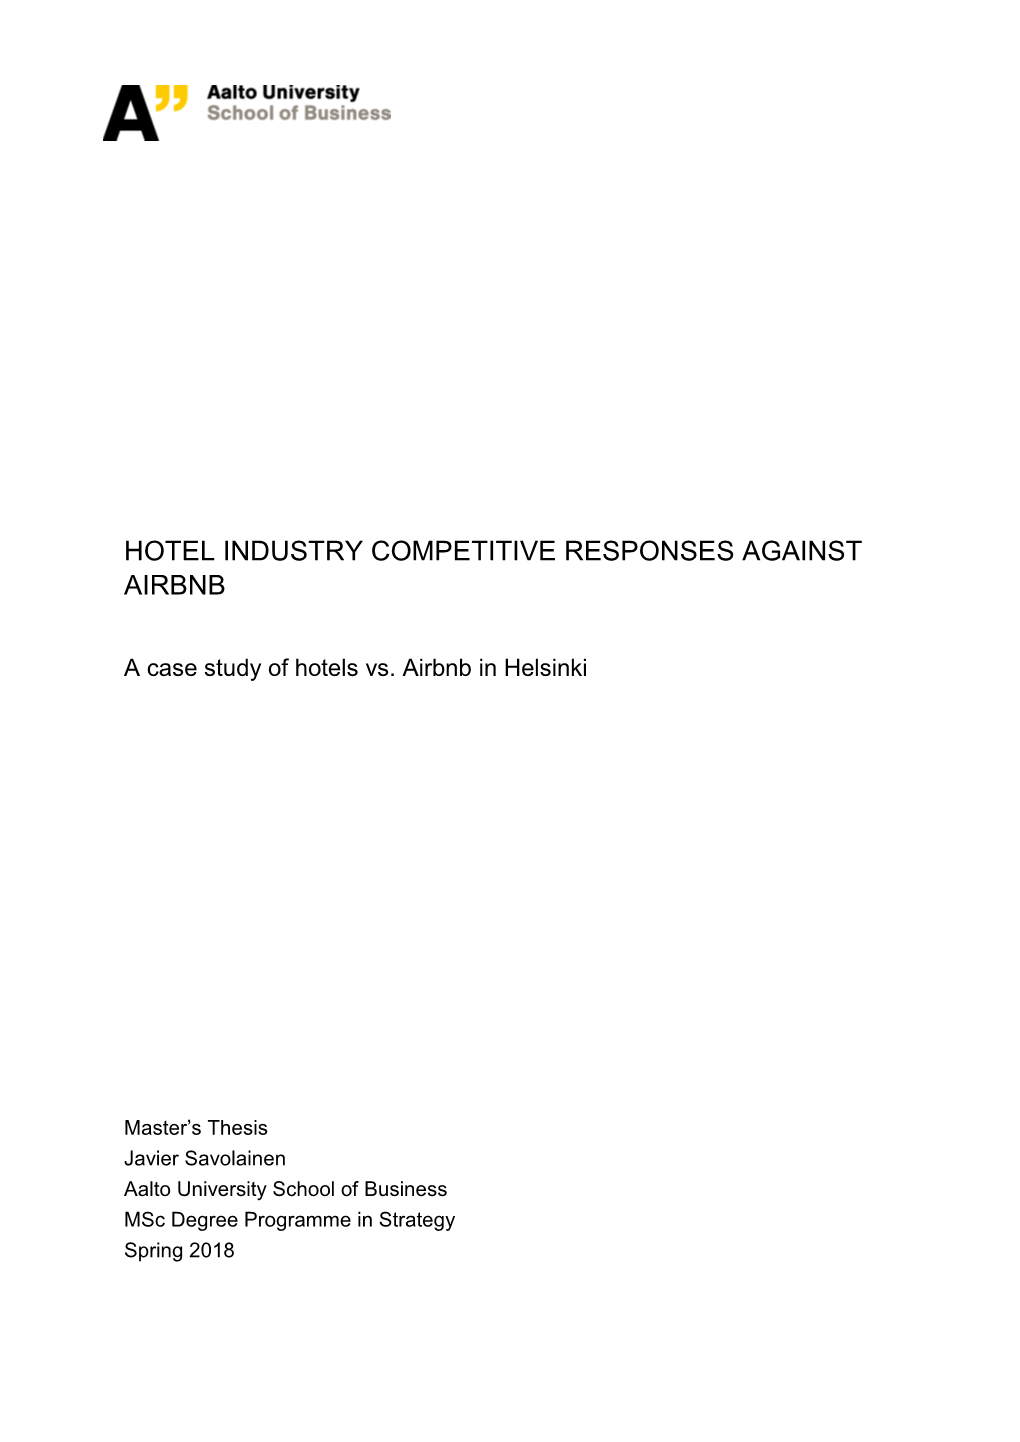 Hotel Industry Competitive Responses Against Airbnb